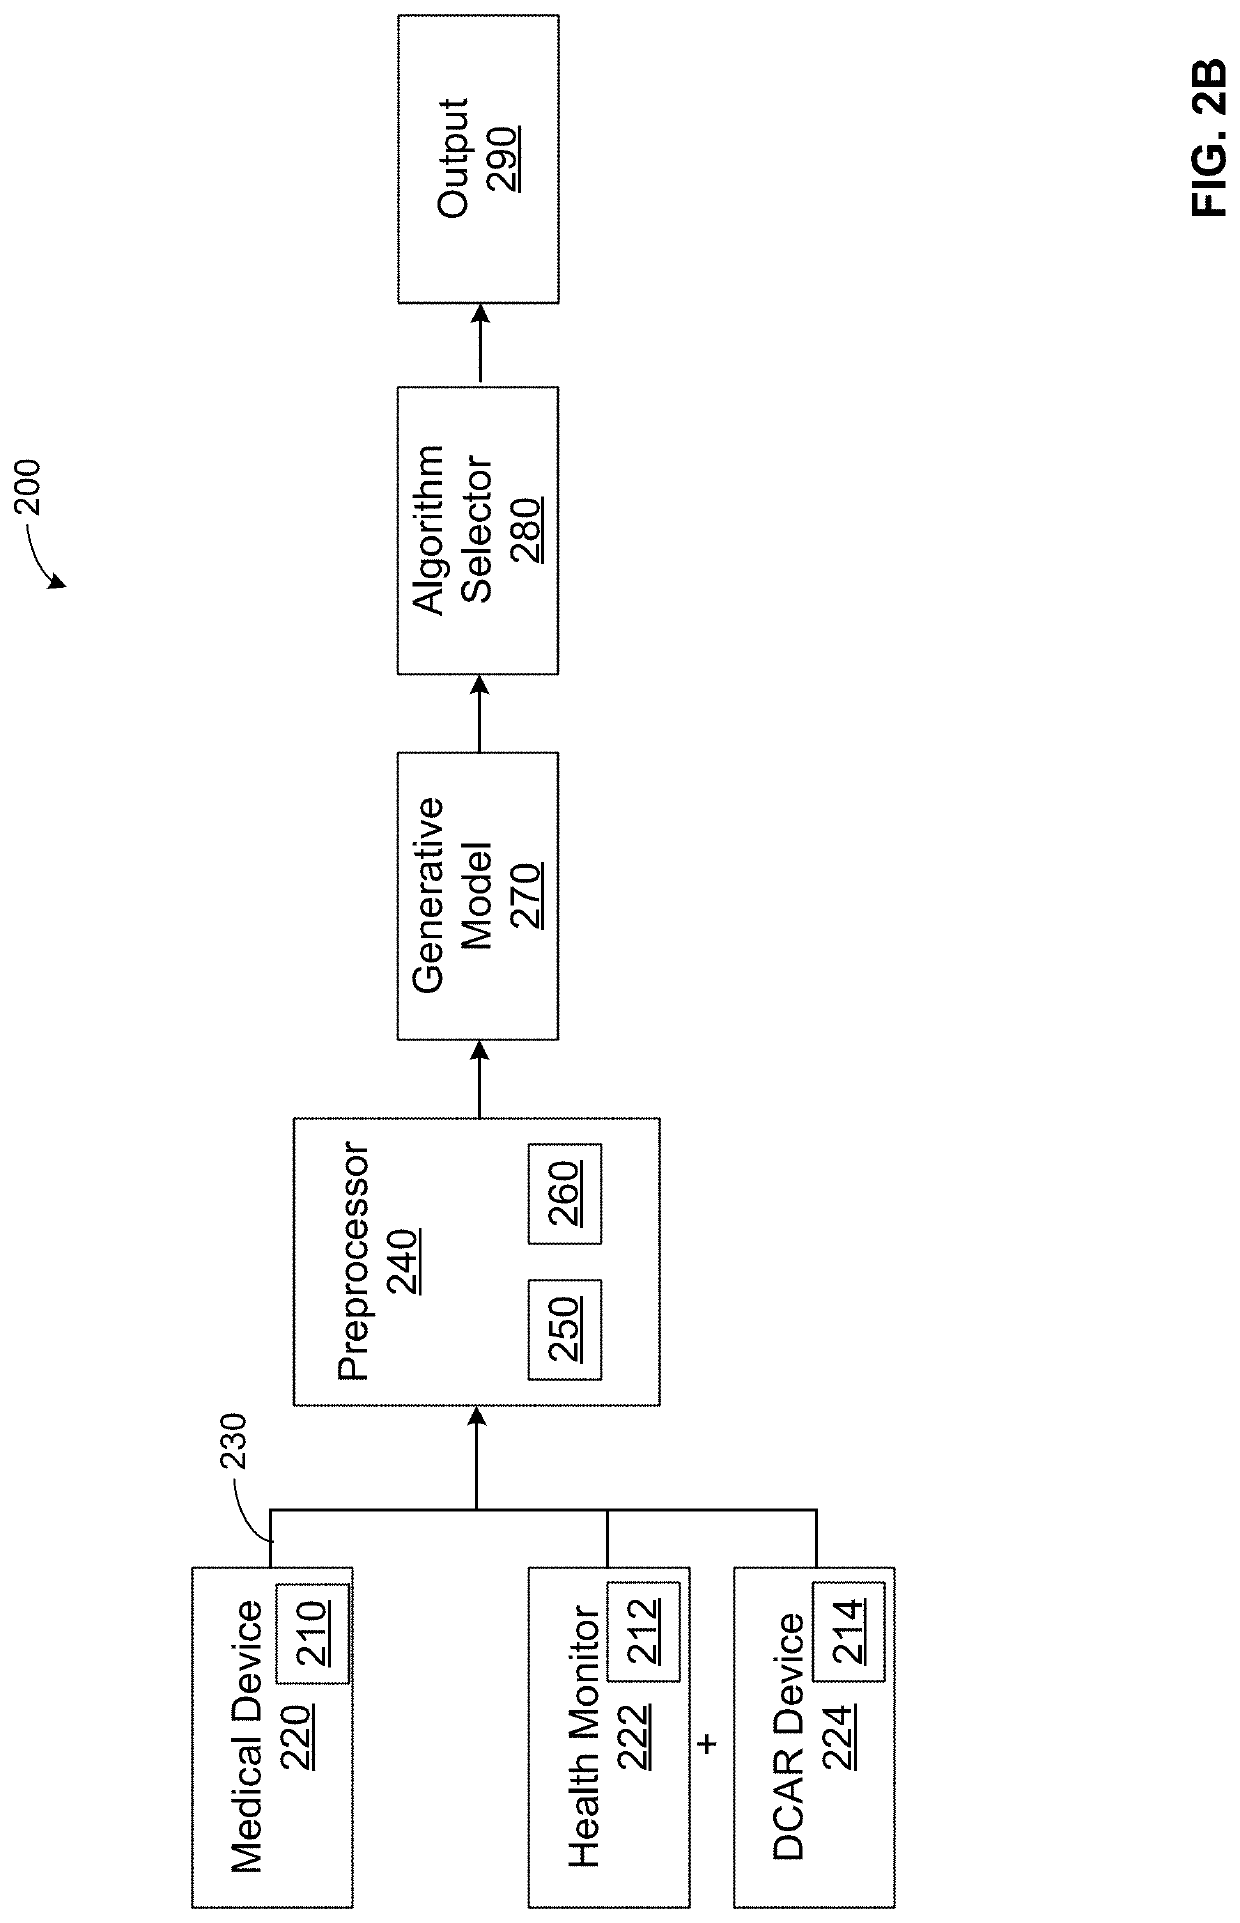 Medical Machine Synthetic Data and Corresponding Event Generation